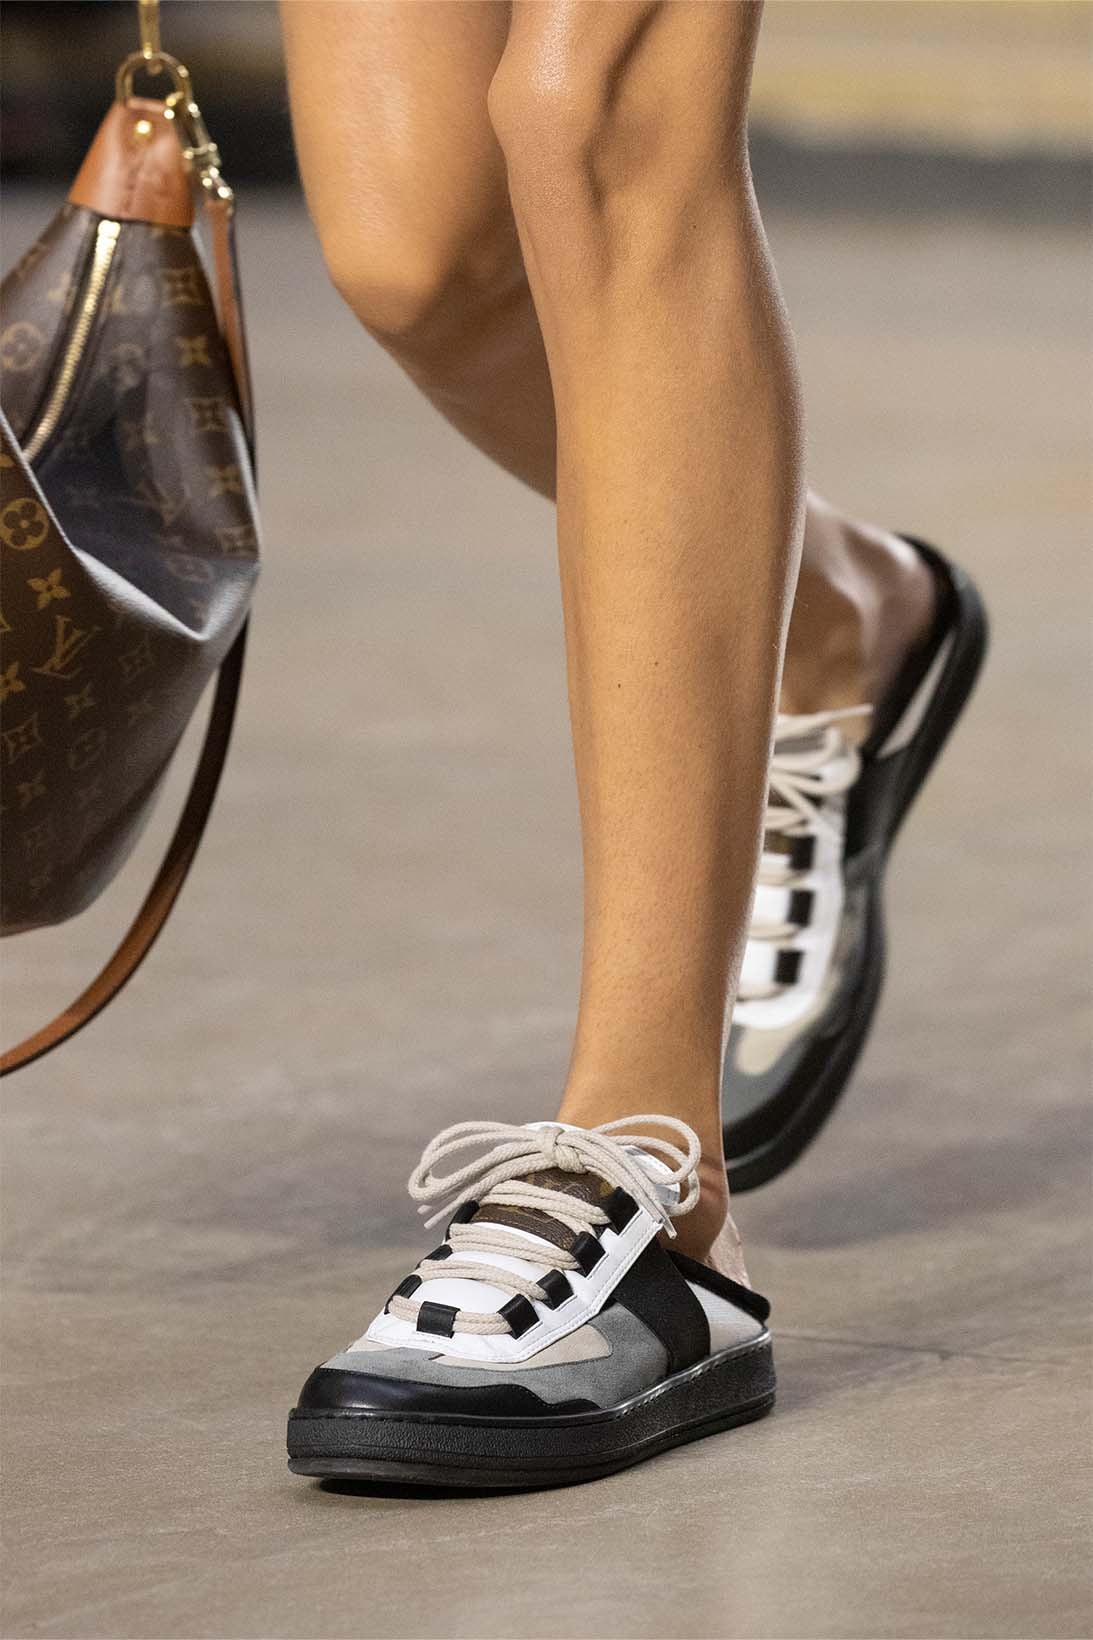 Get the Louis Vuitton Archlight sneaker look for less on Fashion Trend  Guide.